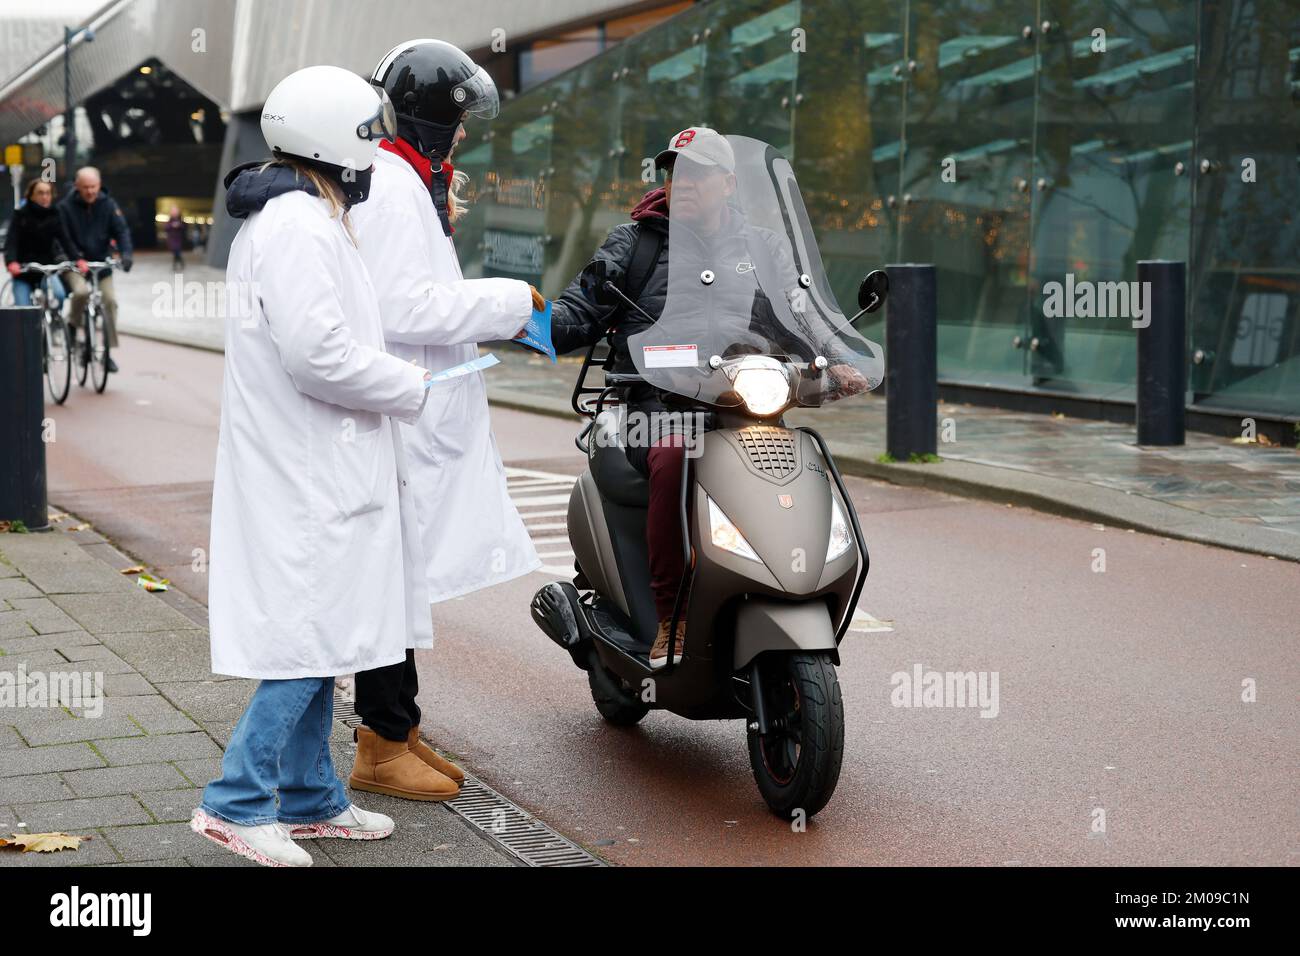 ROTTERDAM - Members of the youth organization TeamAlert are alerting light moped riders to the approaching helmet obligation for light moped riders. The 800,000 moped riders must wear a helmet as of 1 January, otherwise a fine of 100 euros is imminent. ANP BAS CZERWINSKI netherlands out - belgium out Stock Photo